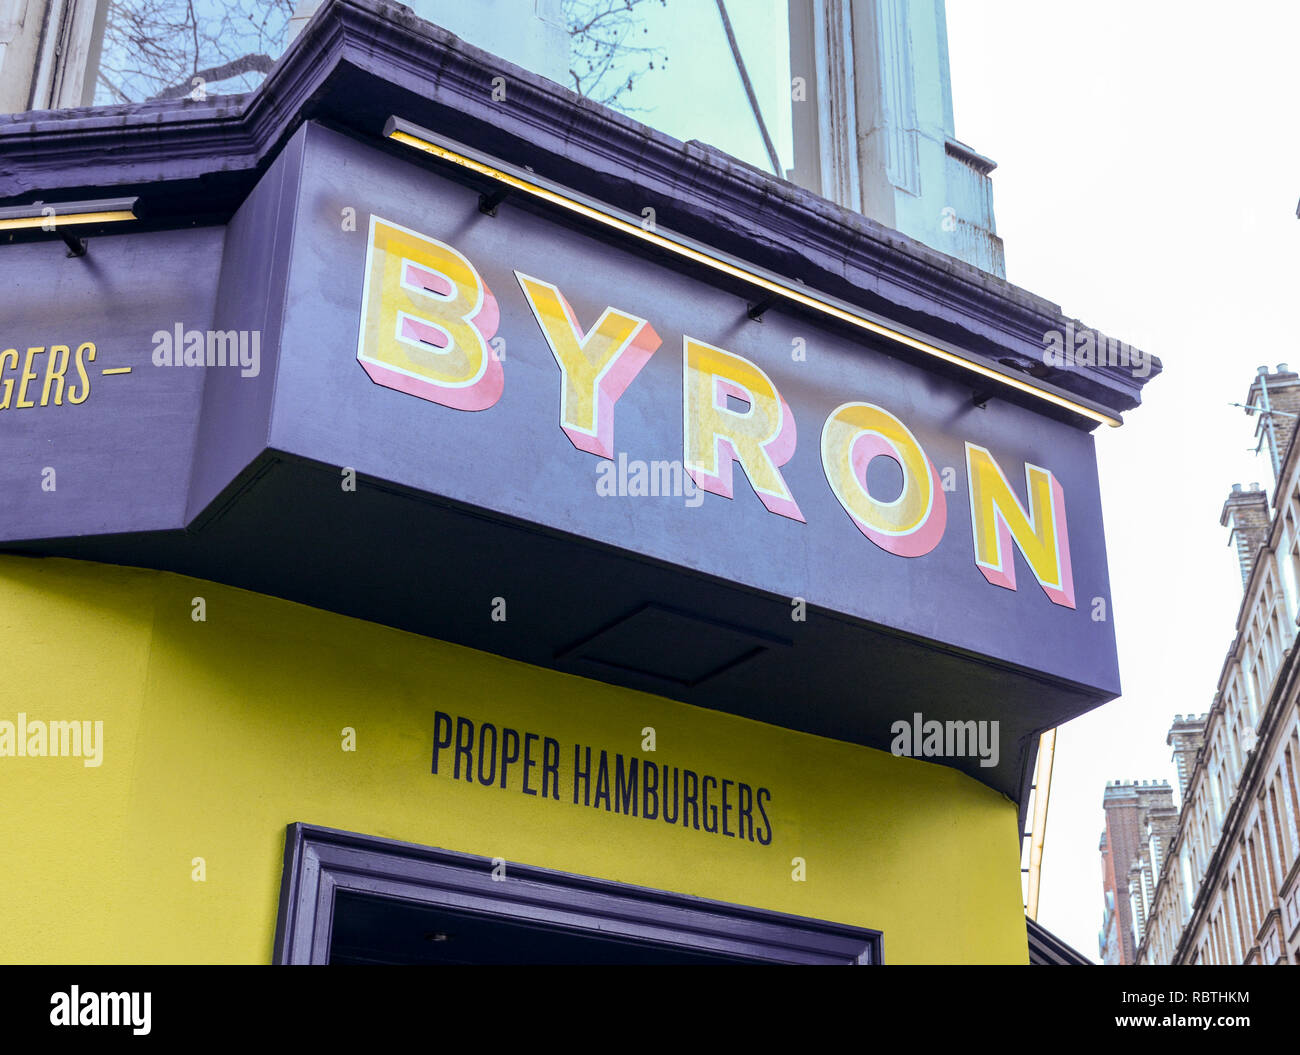 Byron Leicester Square, der Charing Cross Road, London, WC2, Großbritannien Stockfoto